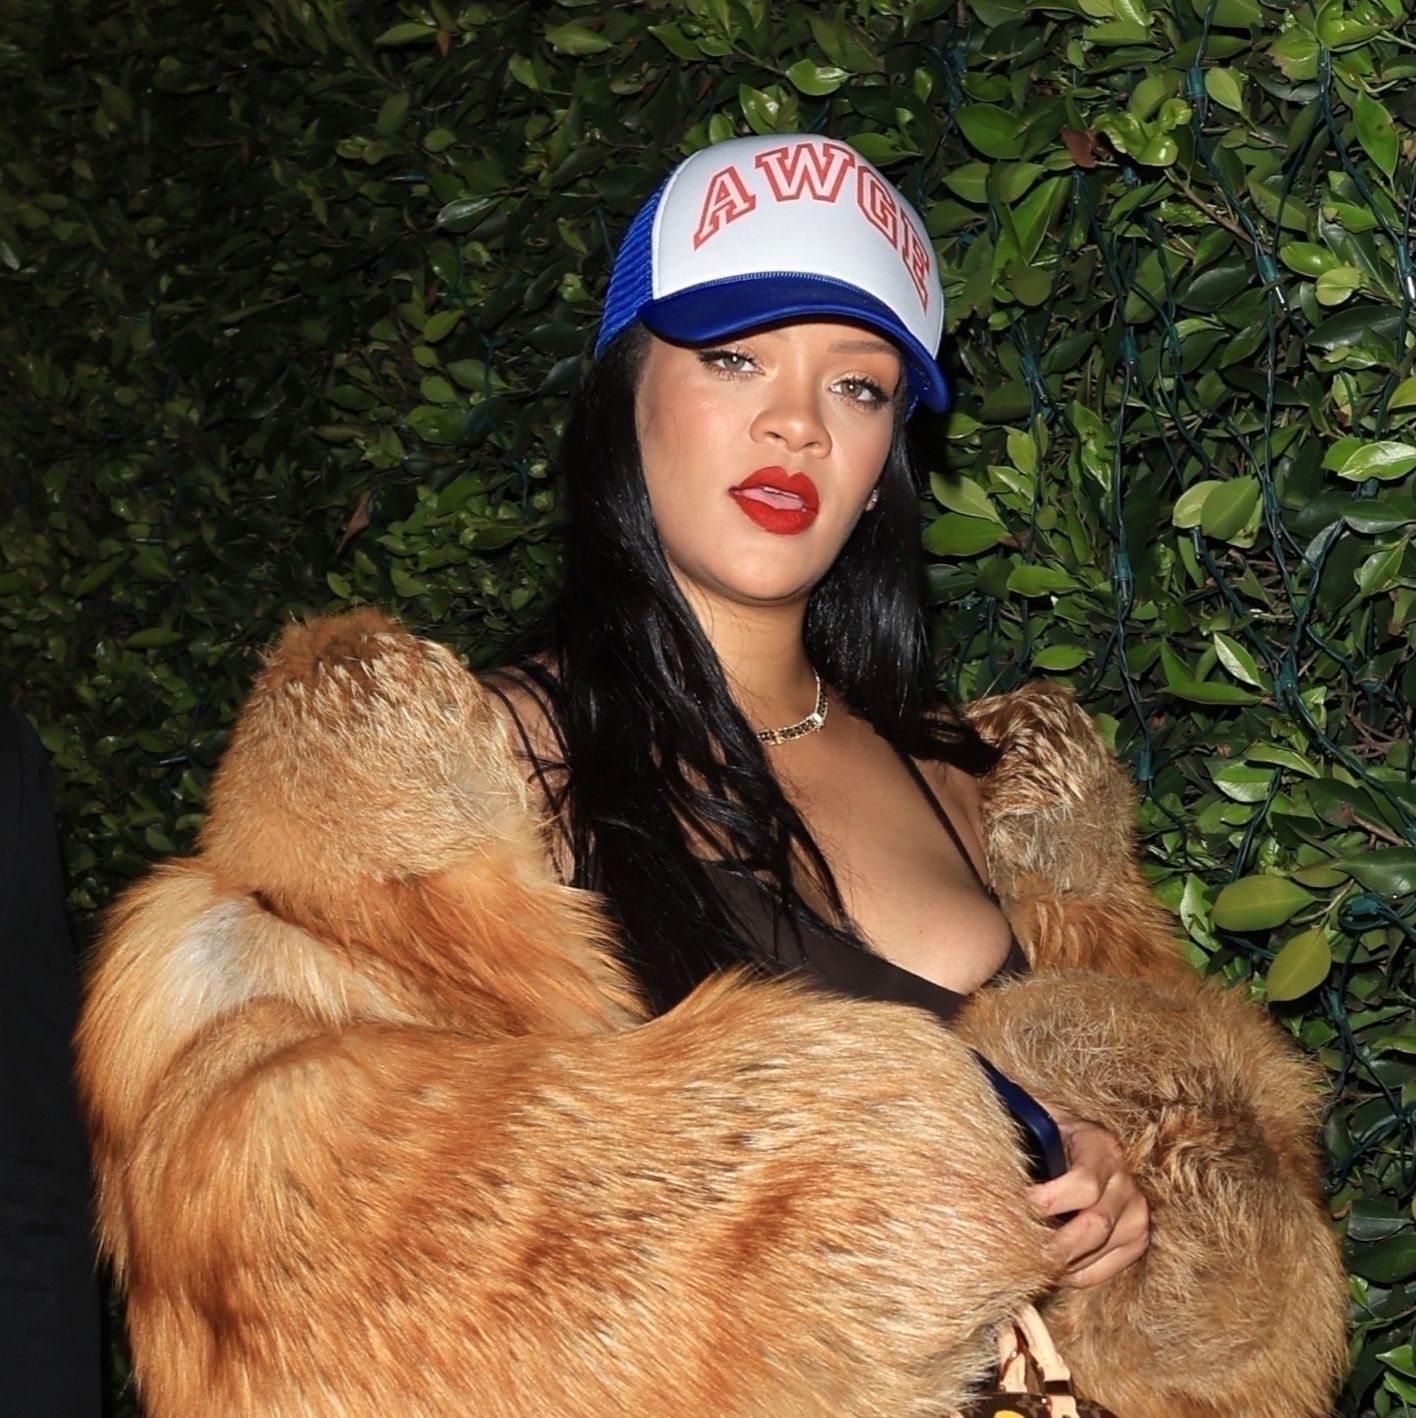 Rihanna and A$AP Rocky grabbed dinner at her favorite place, Giorgio Baldi.